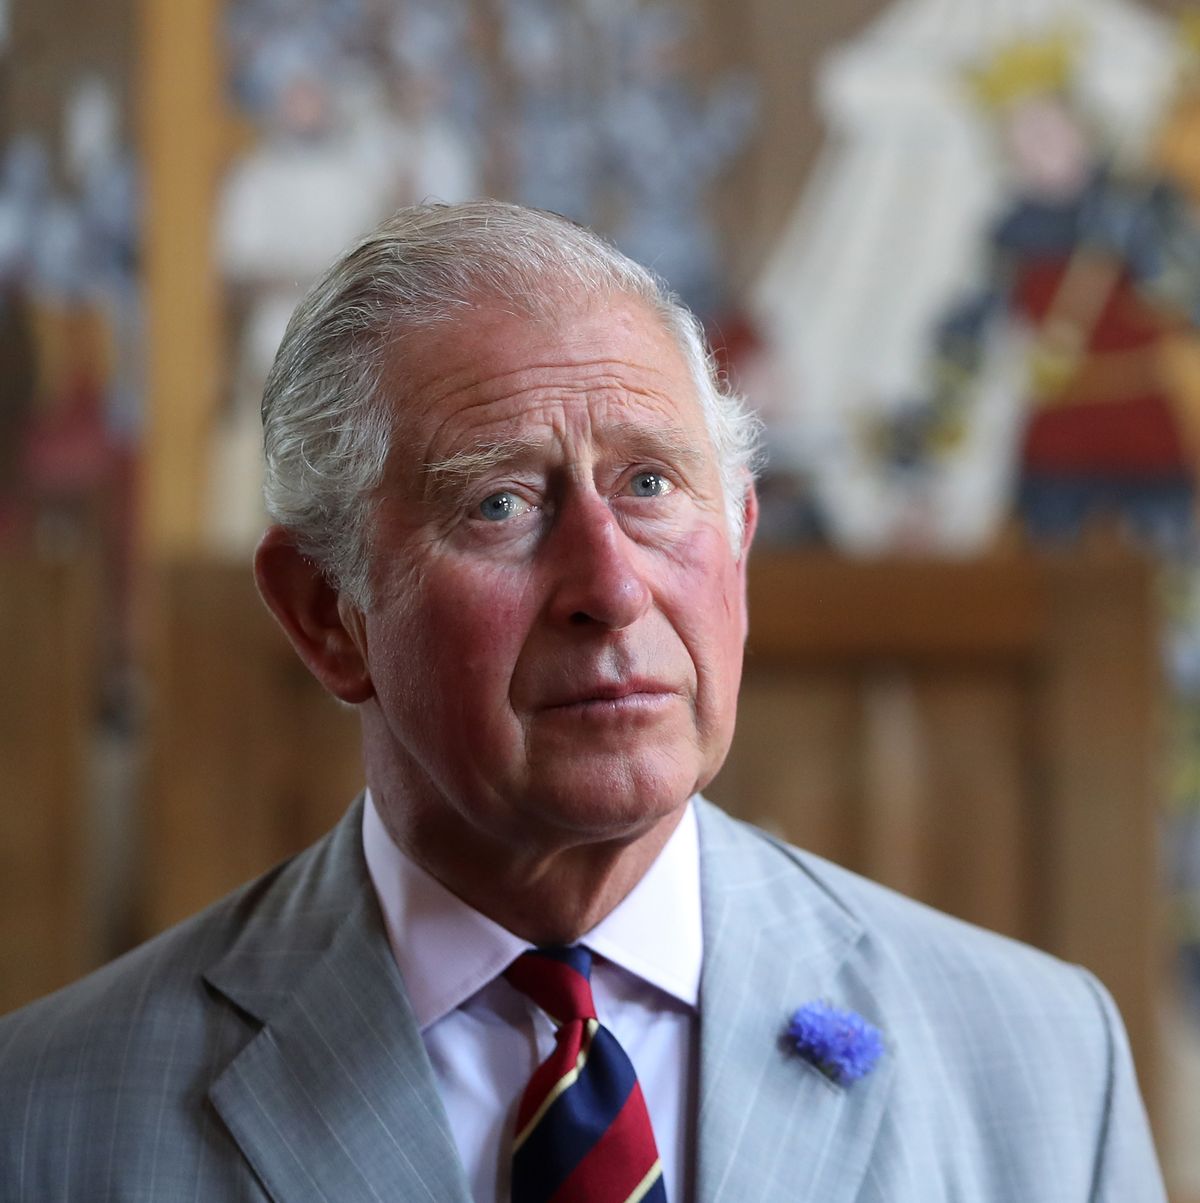 The Prince Of Wales And Duchess Of Cornwall Visit Wales